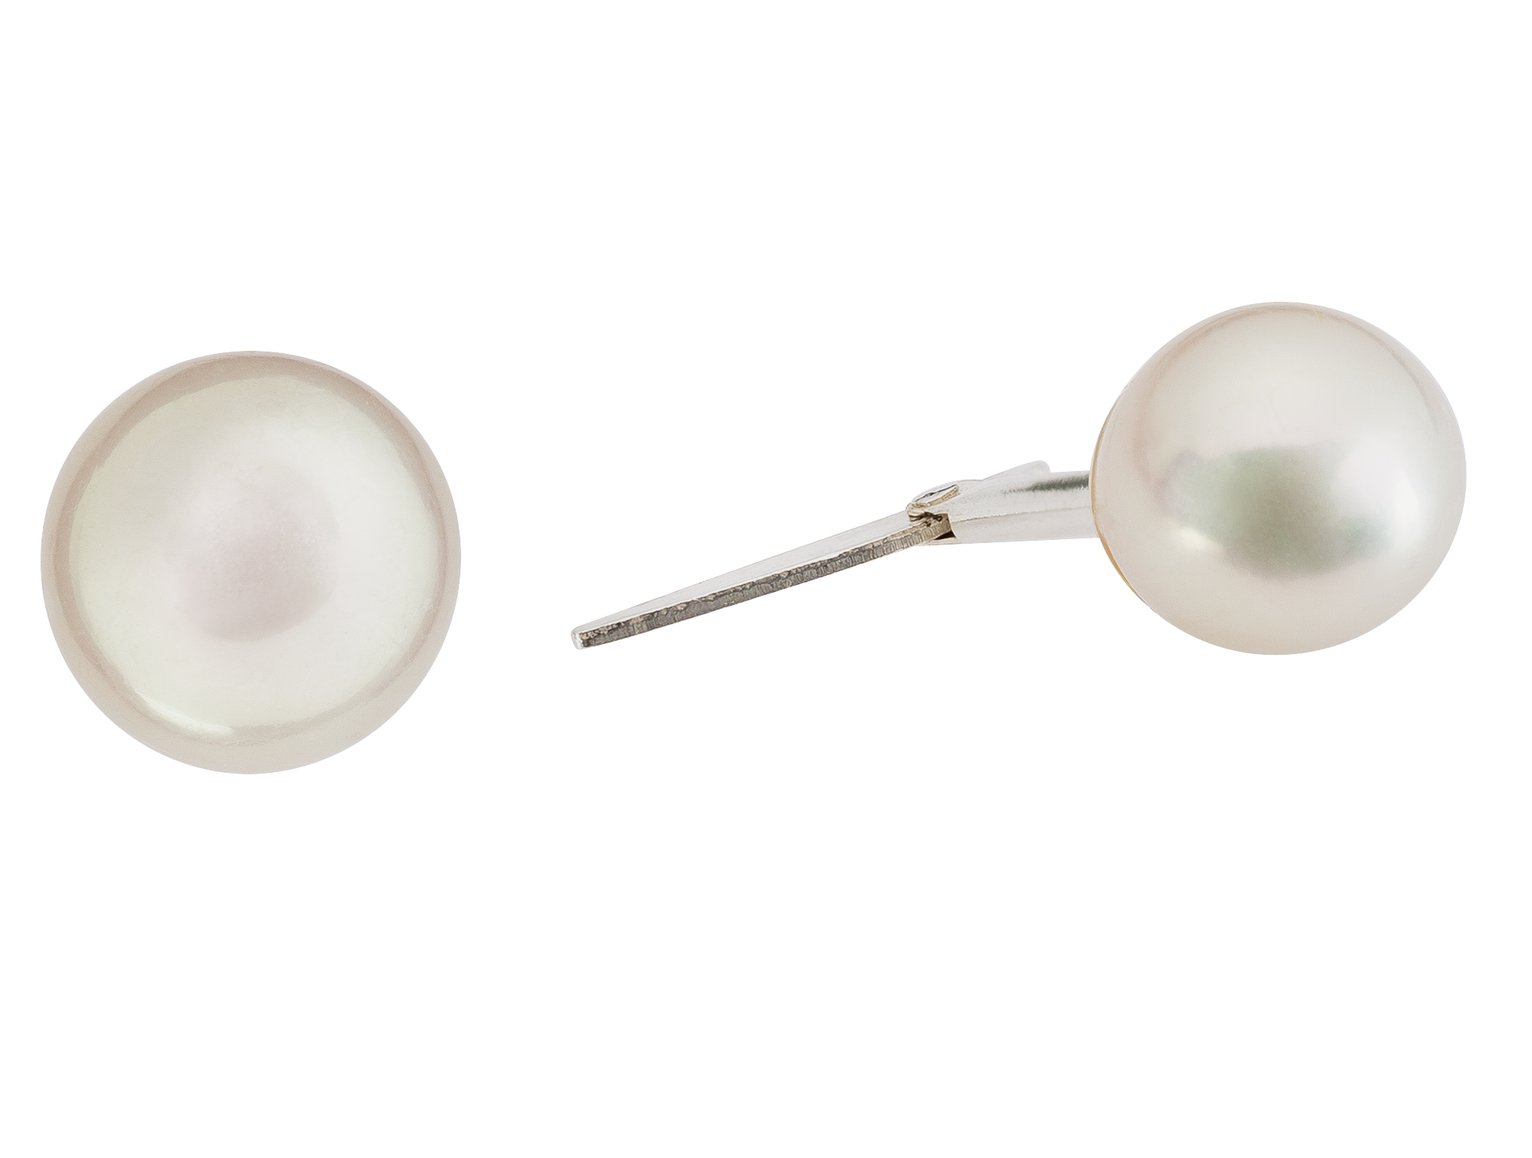 Andralok Sterling Silver Cultured Pearl Stud Earrings Review